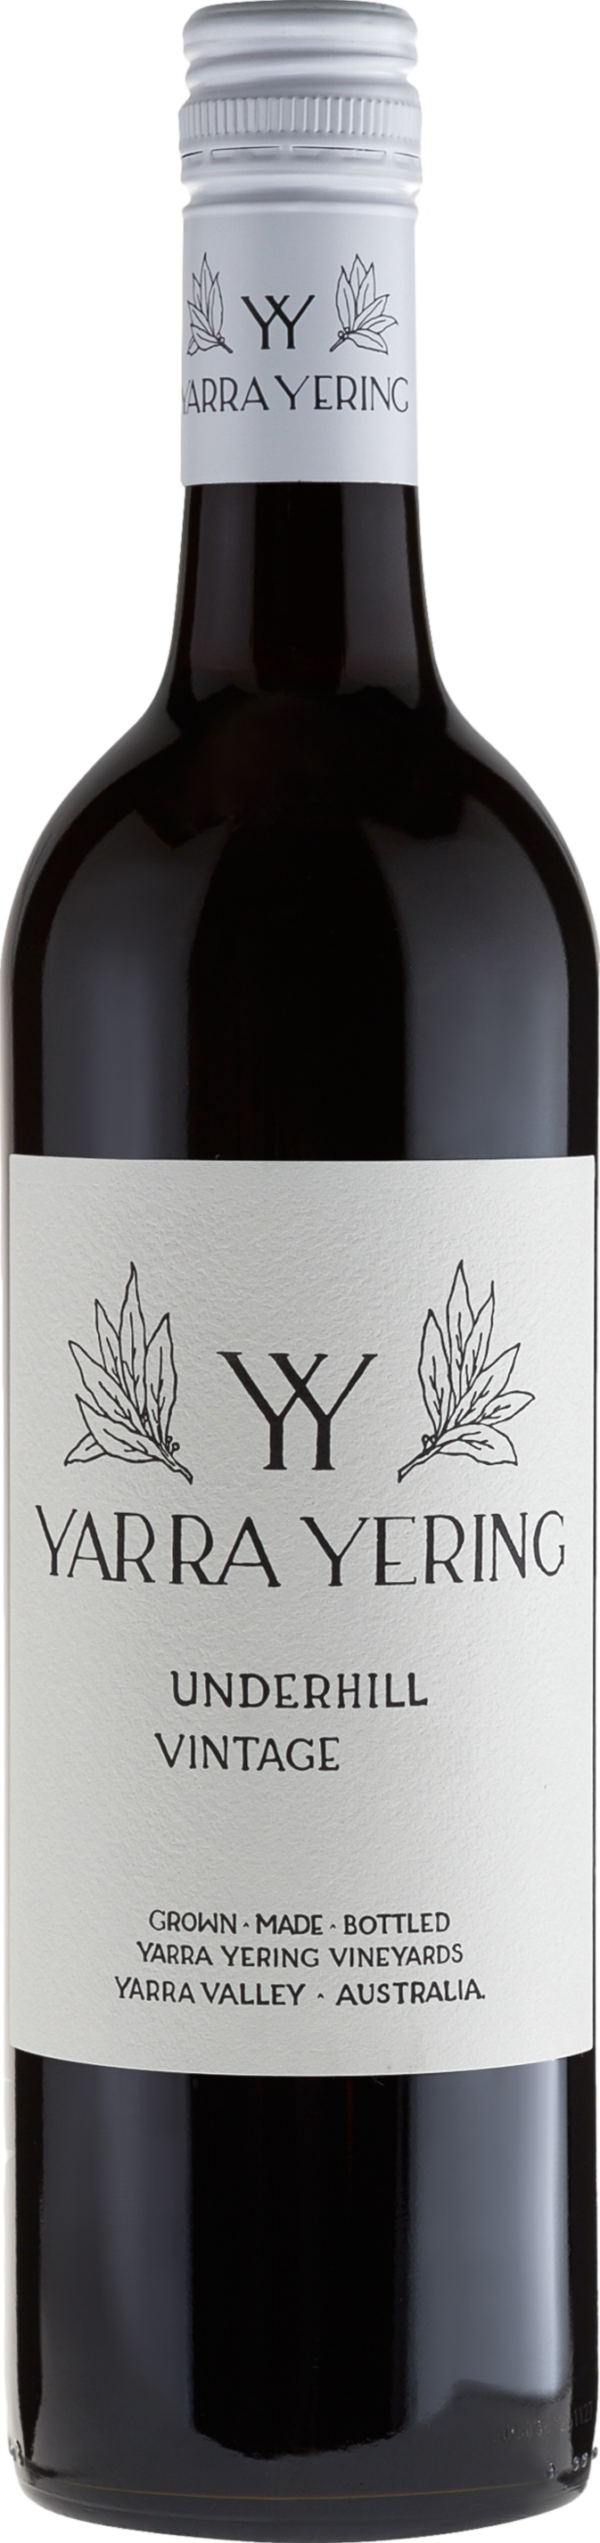 Product image of Yarra Yering Underhill Shiraz 2016 from 8wines